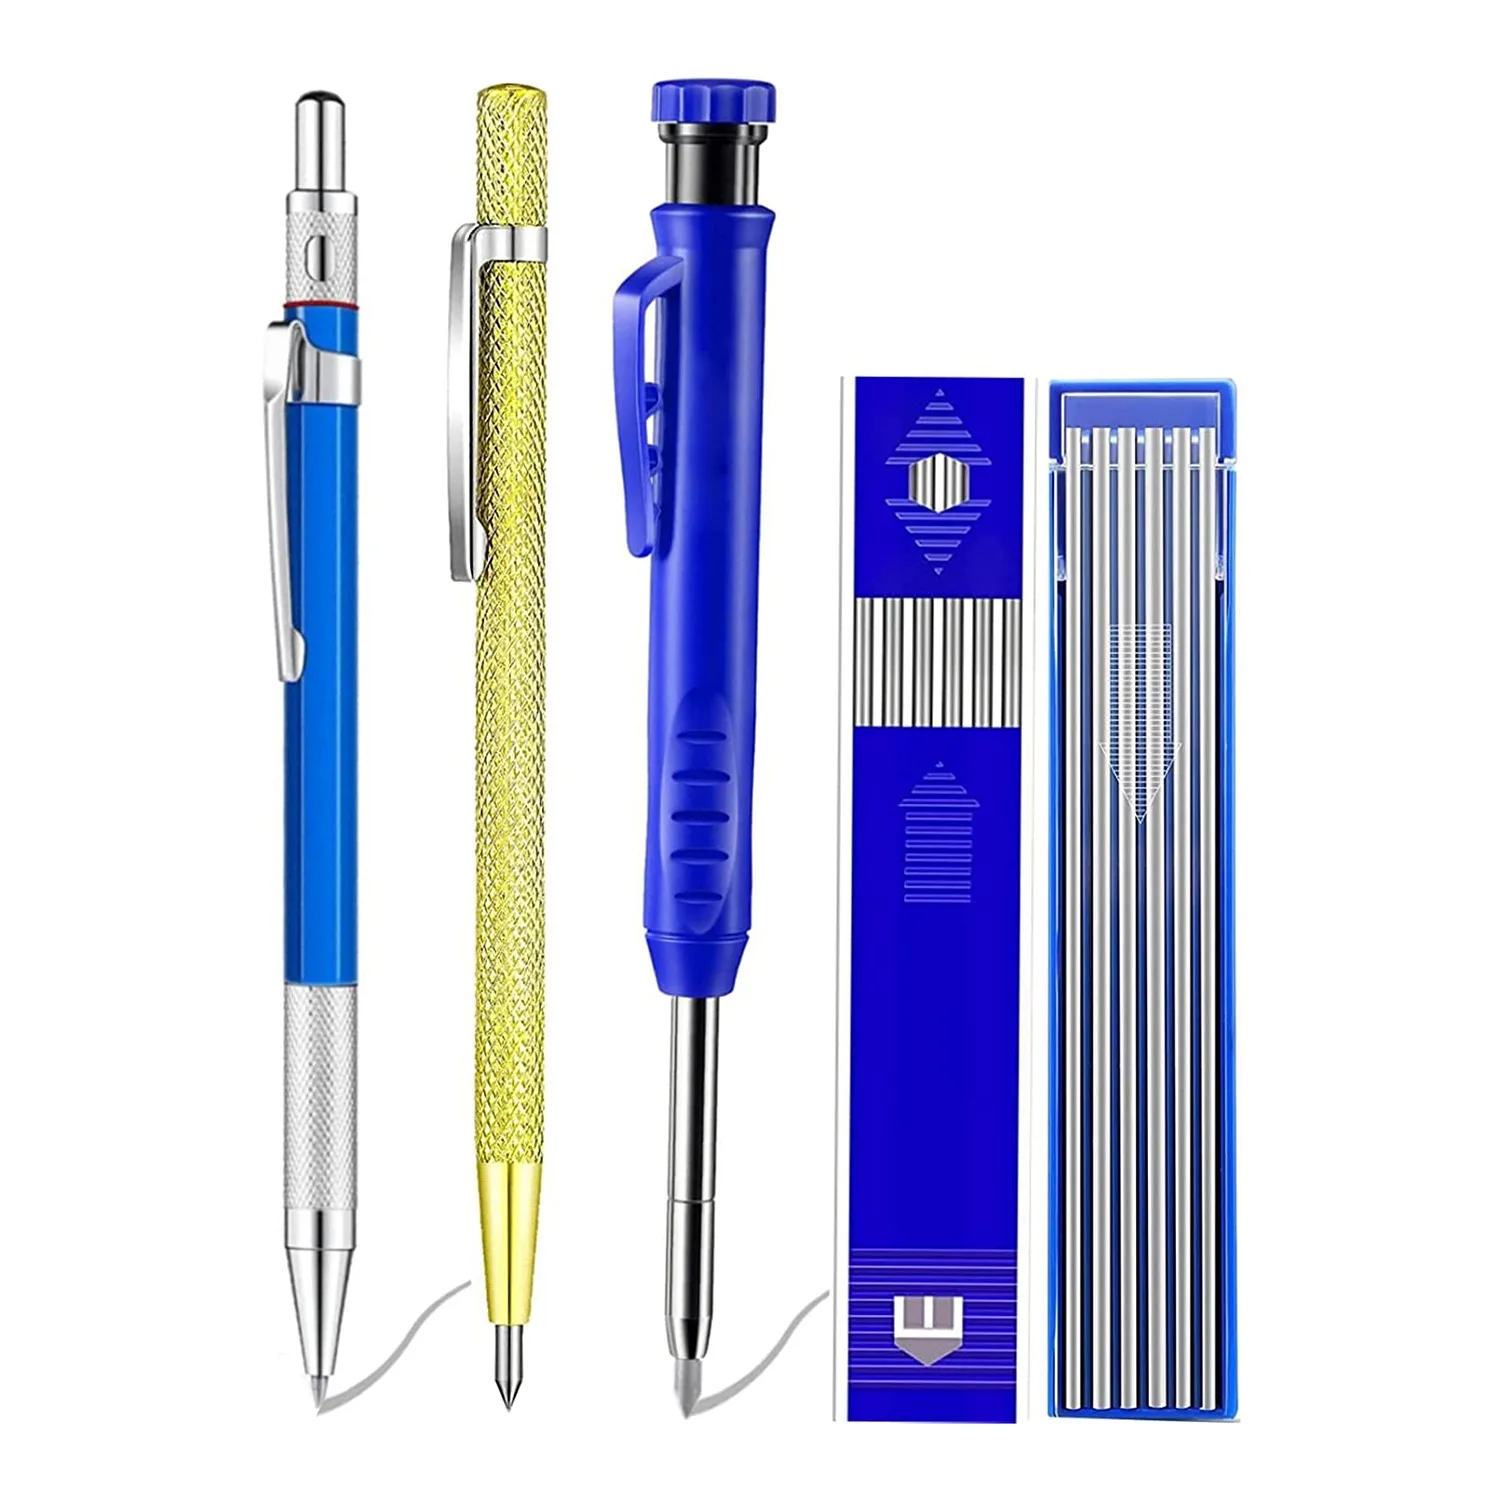 5 Packs Welders Pencil Set with Carbide Scriber Tool Solid Marker Metal Marking Tool Built-in Sharpener solid carpenter pencil set with built in sharpener deep hole mechanical pencil marker marking tool for draft drawing crafting